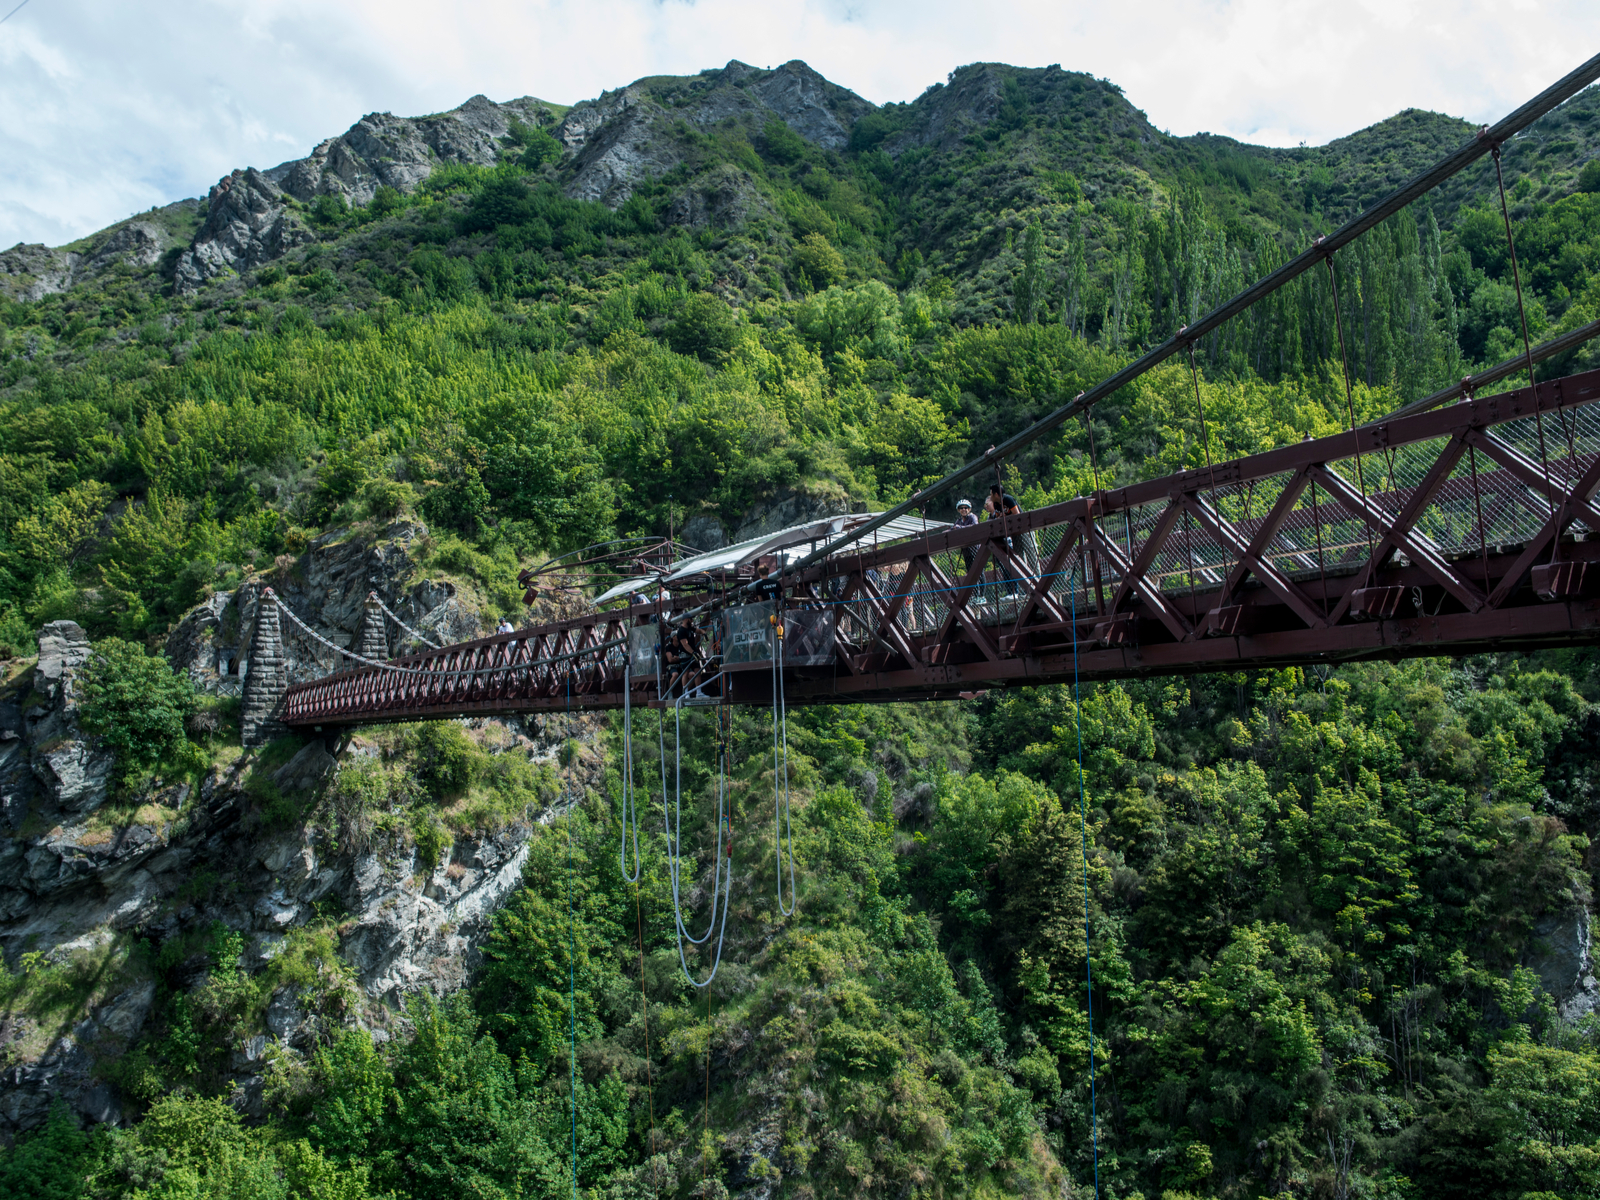 A man preparing to bungee jump together with some friends on Kawarau Suspension Bridge, a green mountain in background, that is one of the most famous Lord of the Rings filming locations